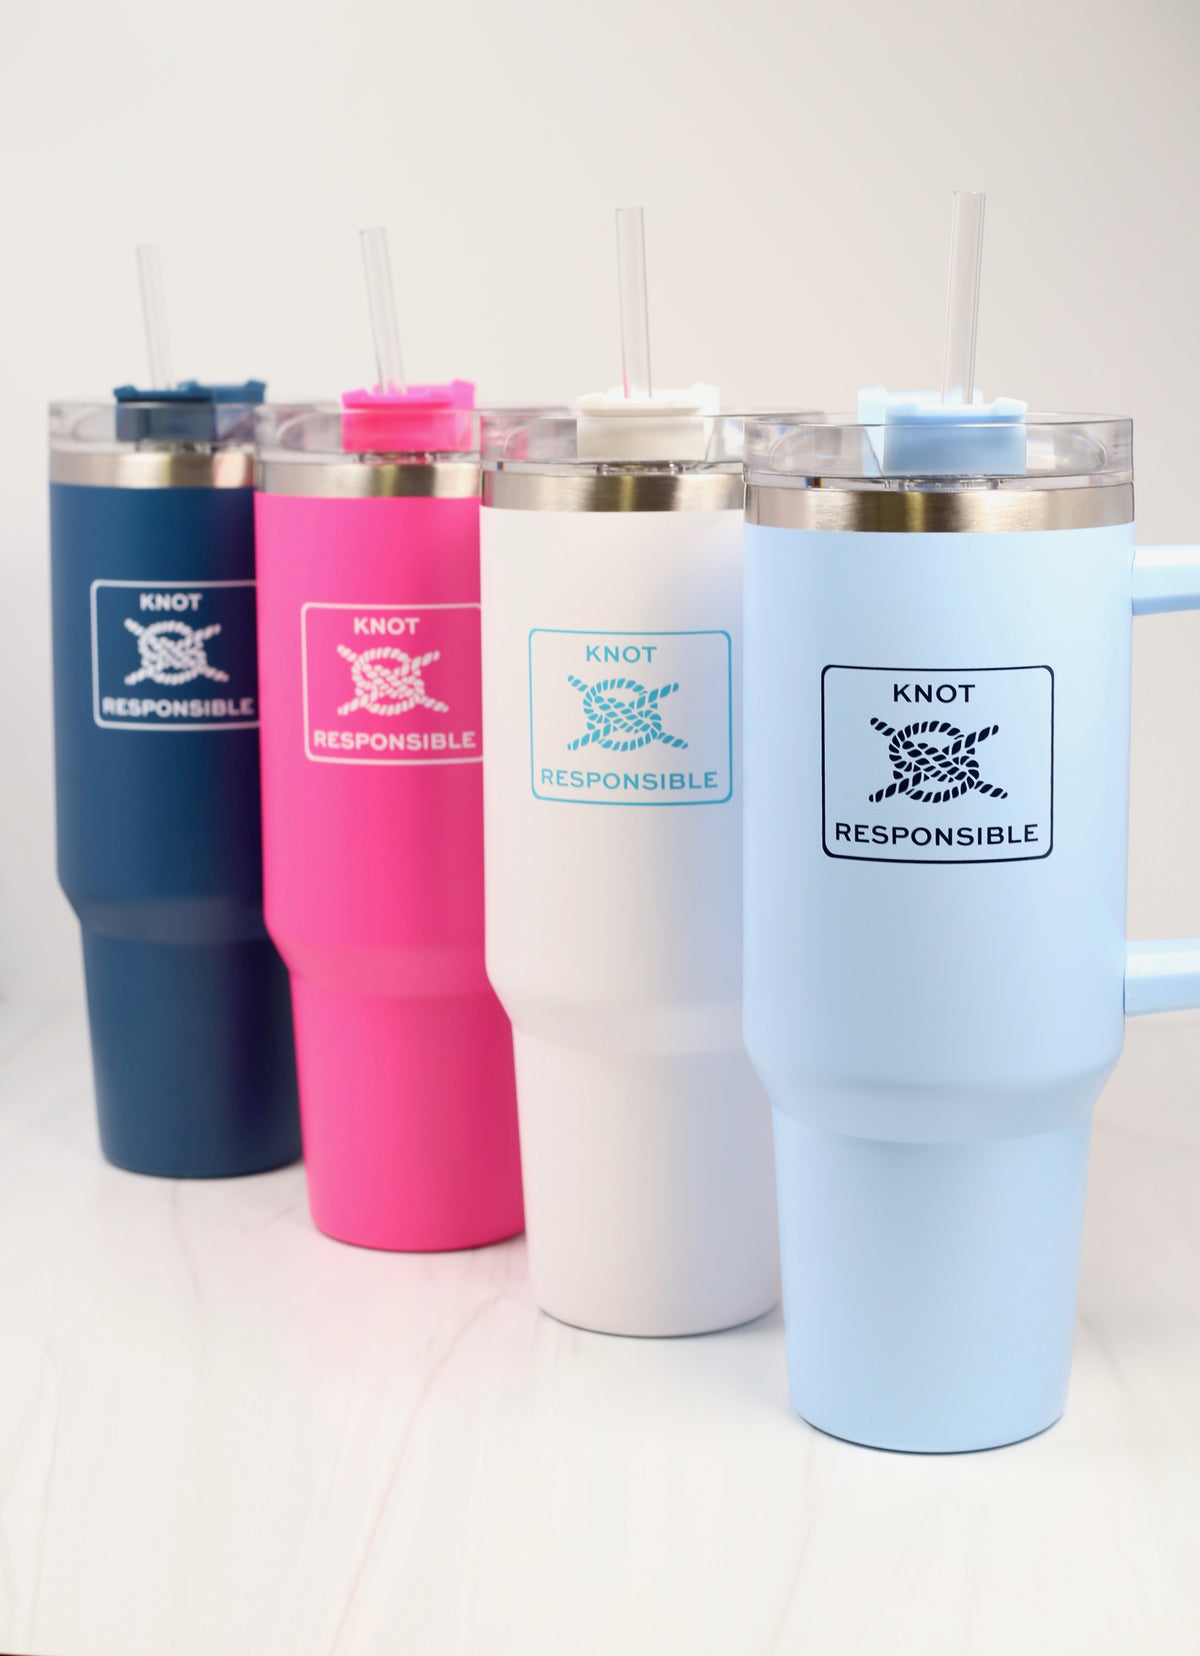 WHATS HOT JEWELRY 40 OZ NAVY TUMBLER | Accessories Gifts